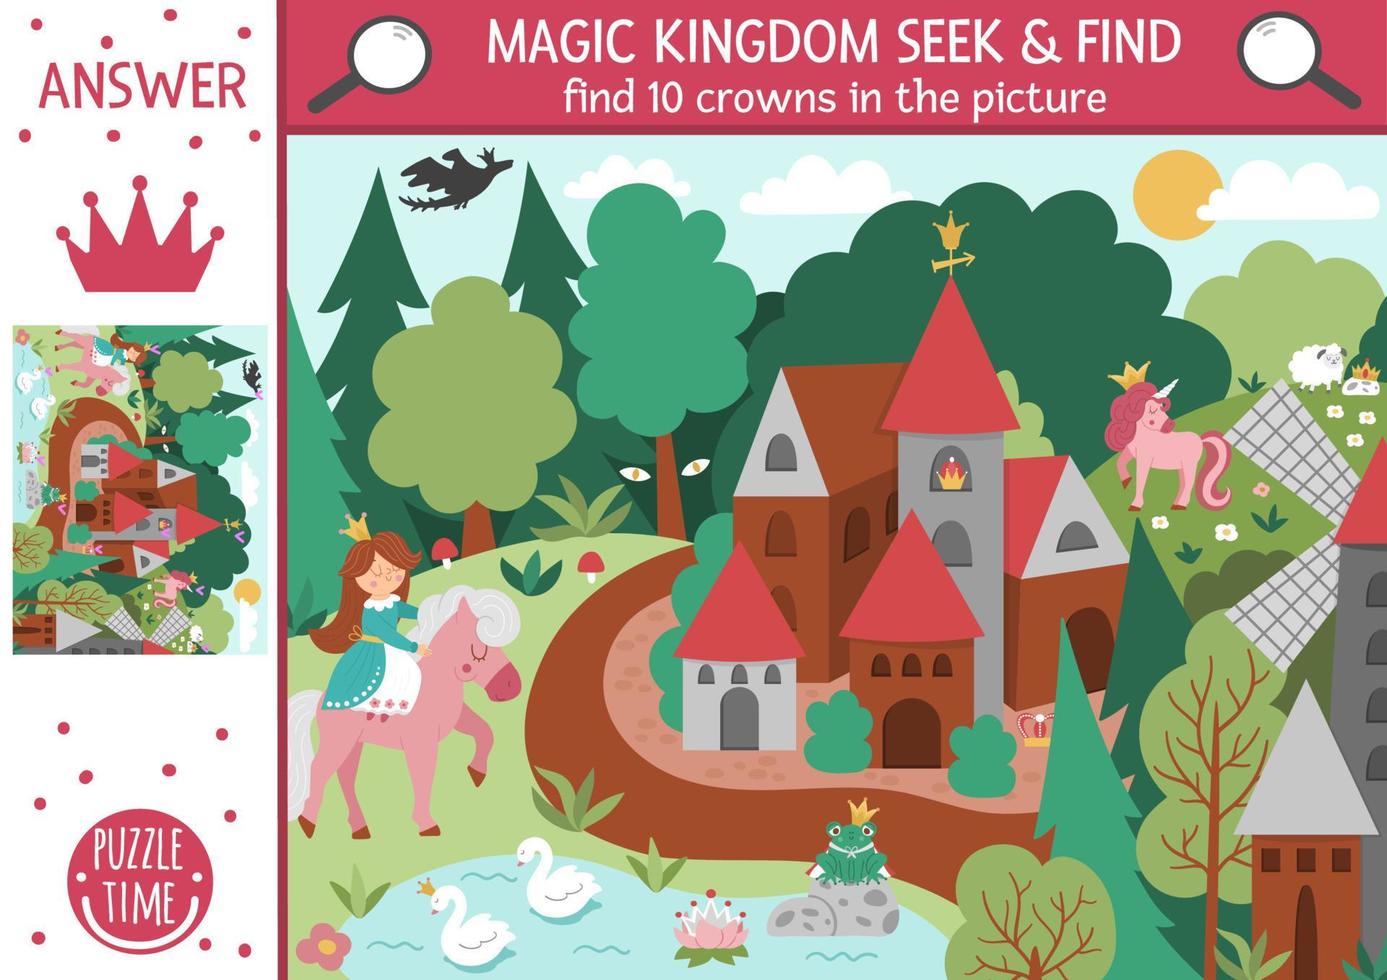 Vector fairytale searching game with medieval village landscape and princess. Spot hidden crowns in the picture. Simple fantasy seek and find magic kingdom educational printable activity for kids